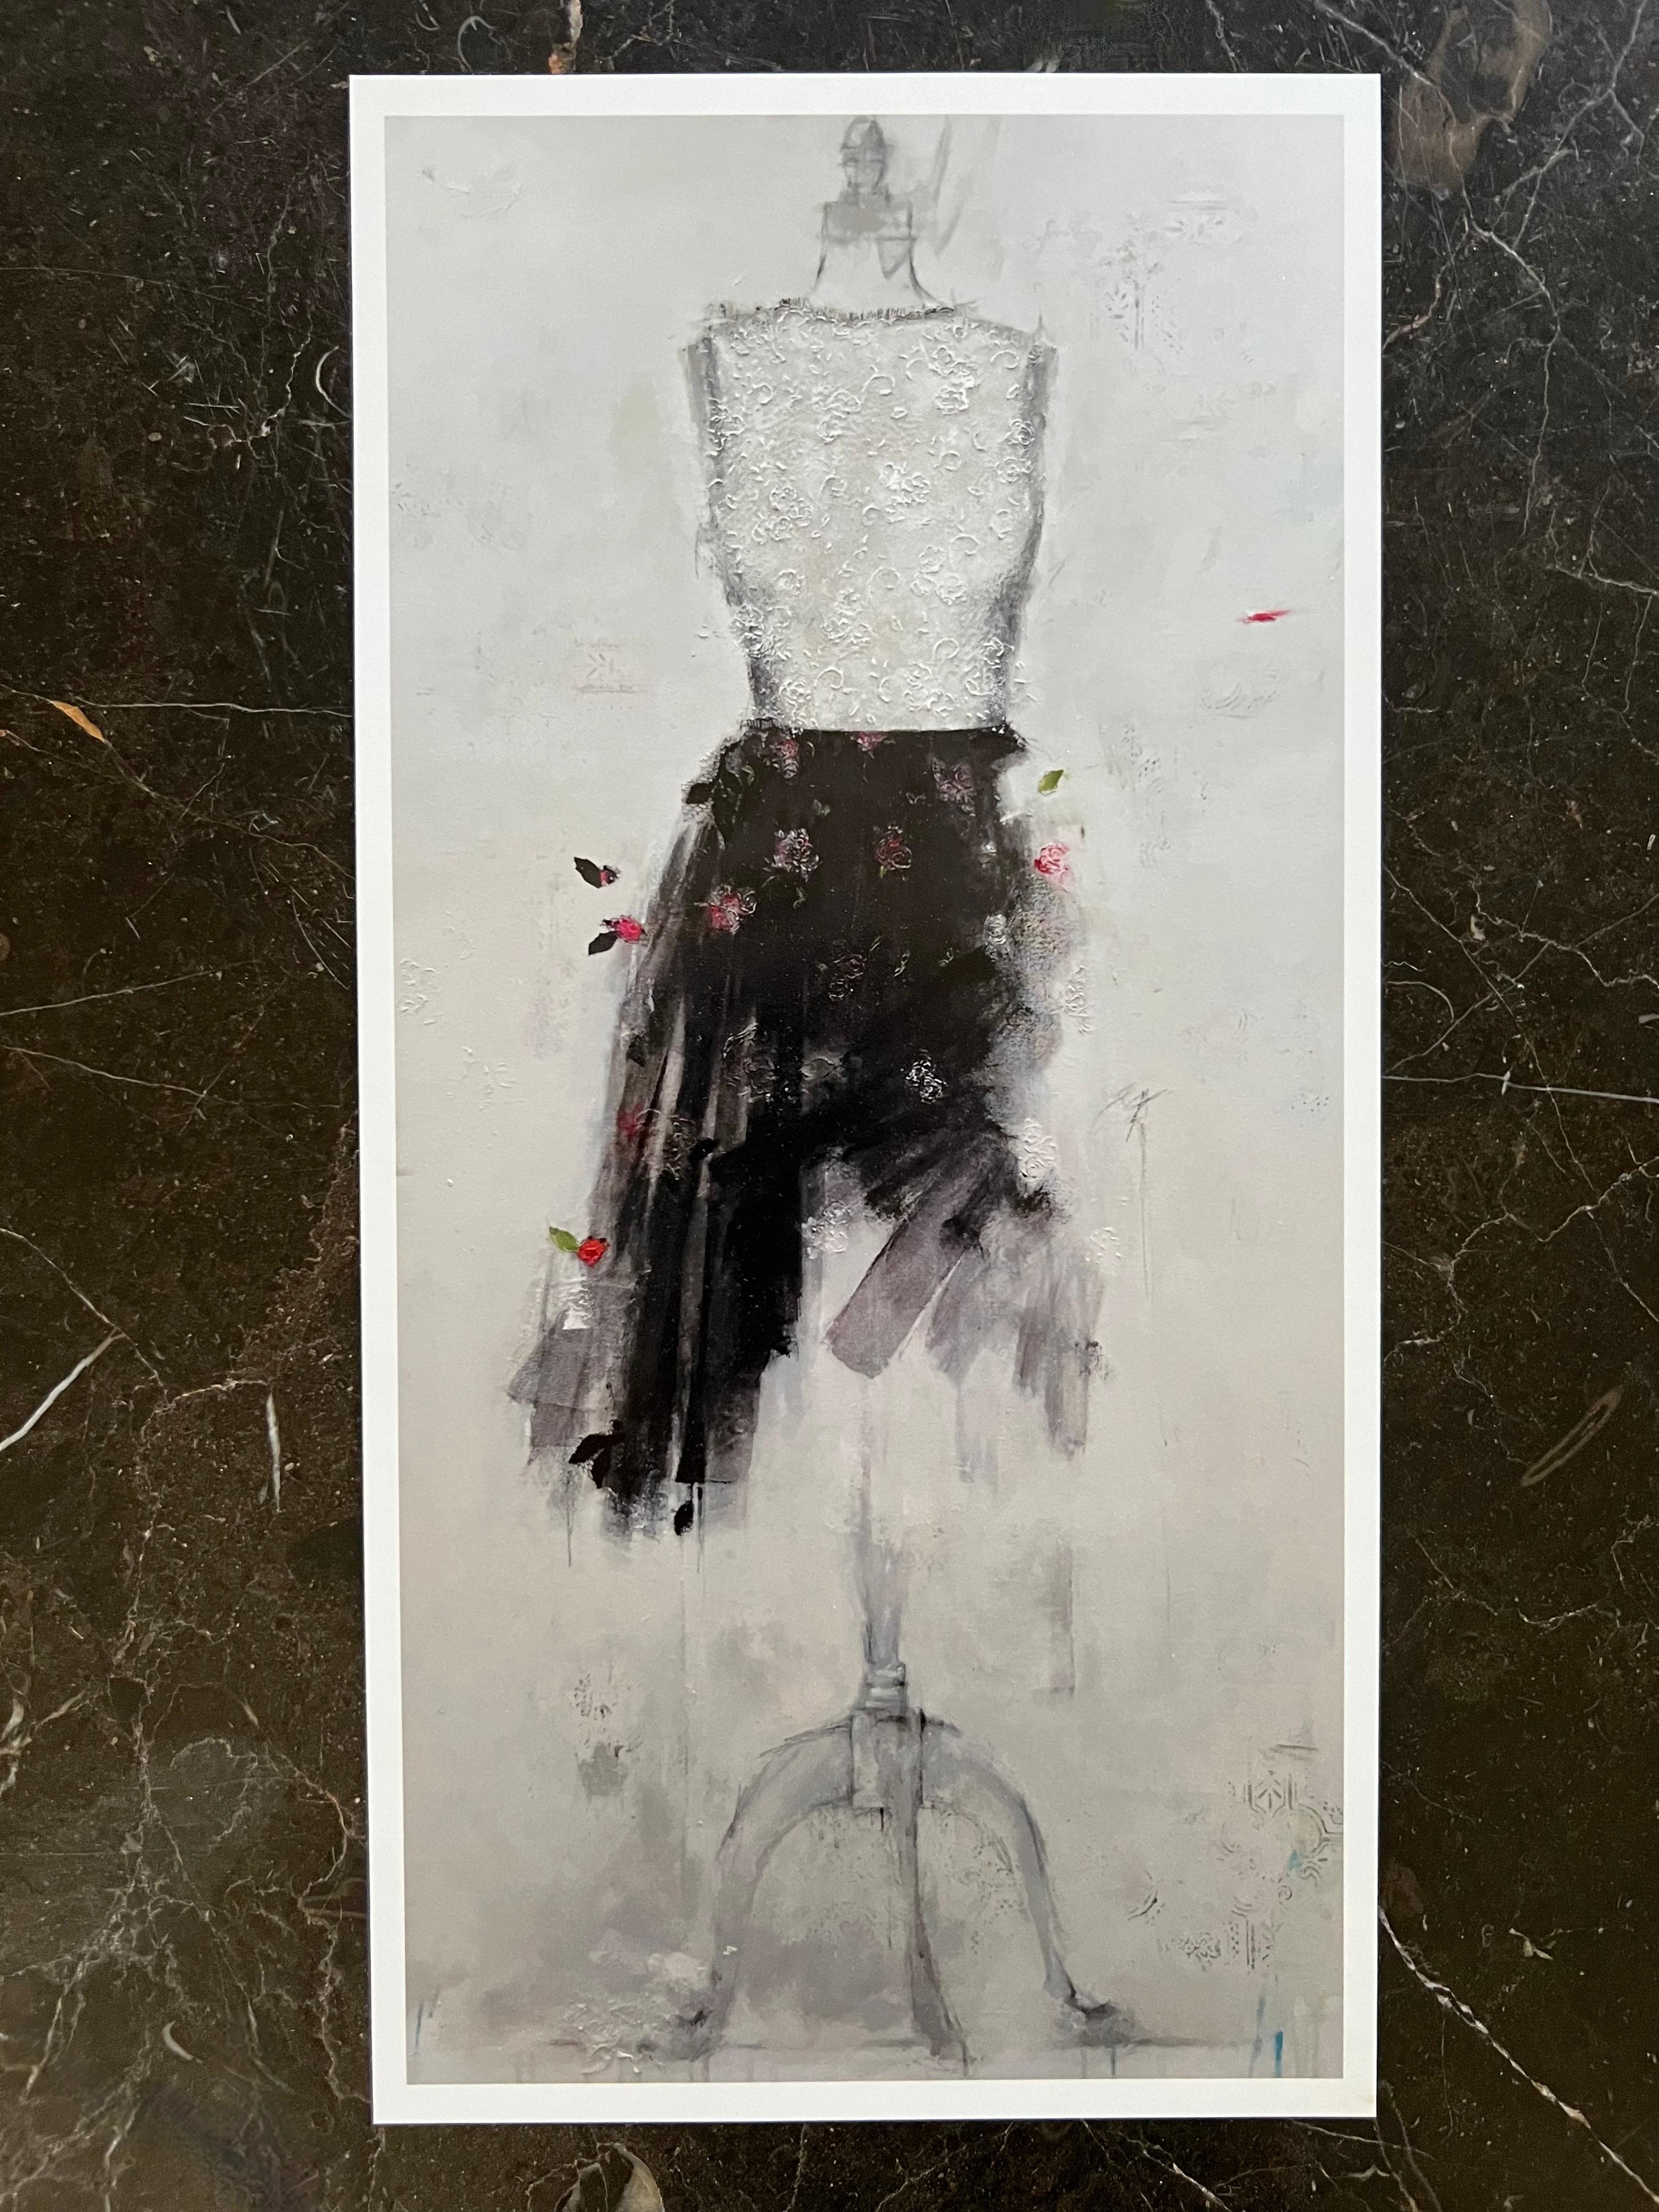 This art print on photographic paper is a one-of-kind reproduction of the original painting. It depicts an intricate dress combining the elegance of lace with floral embellishment. Only one available, hand signed on back. 

//

Andrea Stajan-Ferkul